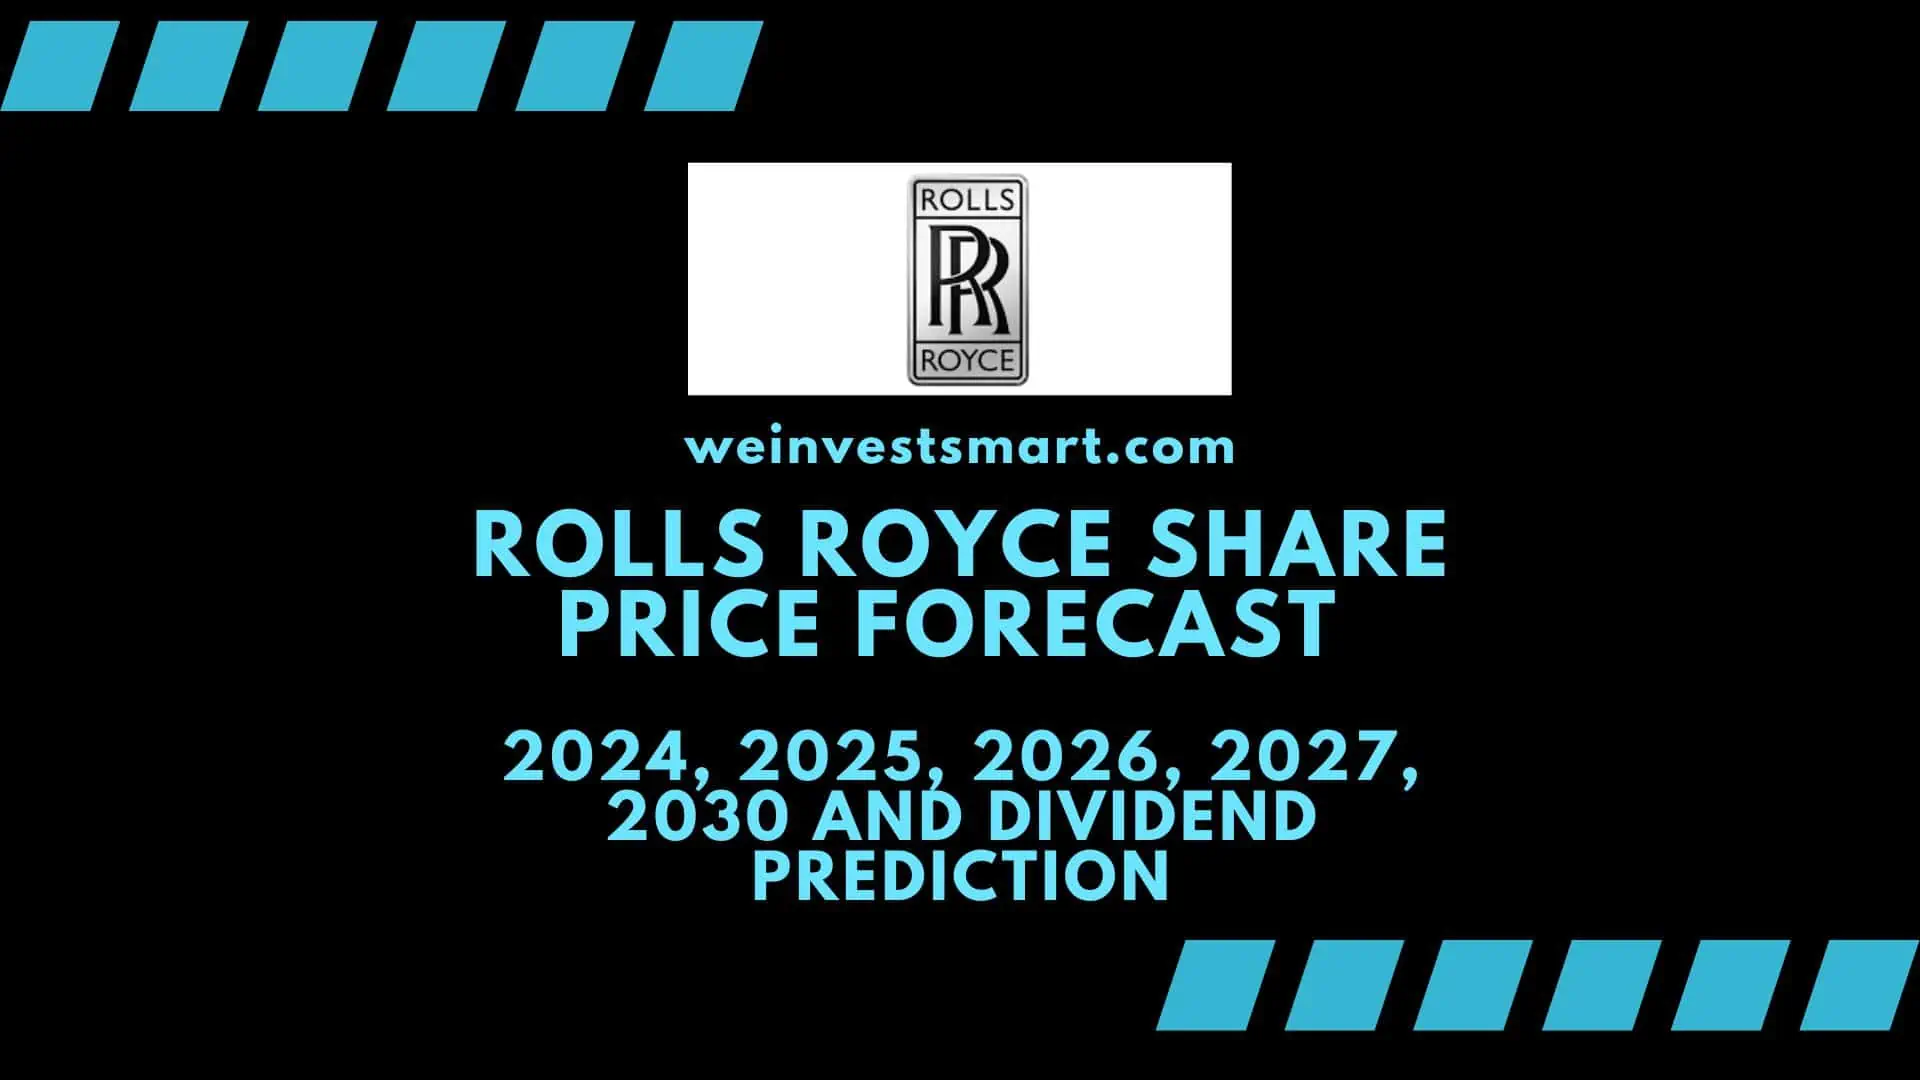 Rolls Royce Share Price Forecast 2024, 2025, 2026, 2027, 2030 and Dividend Prediction